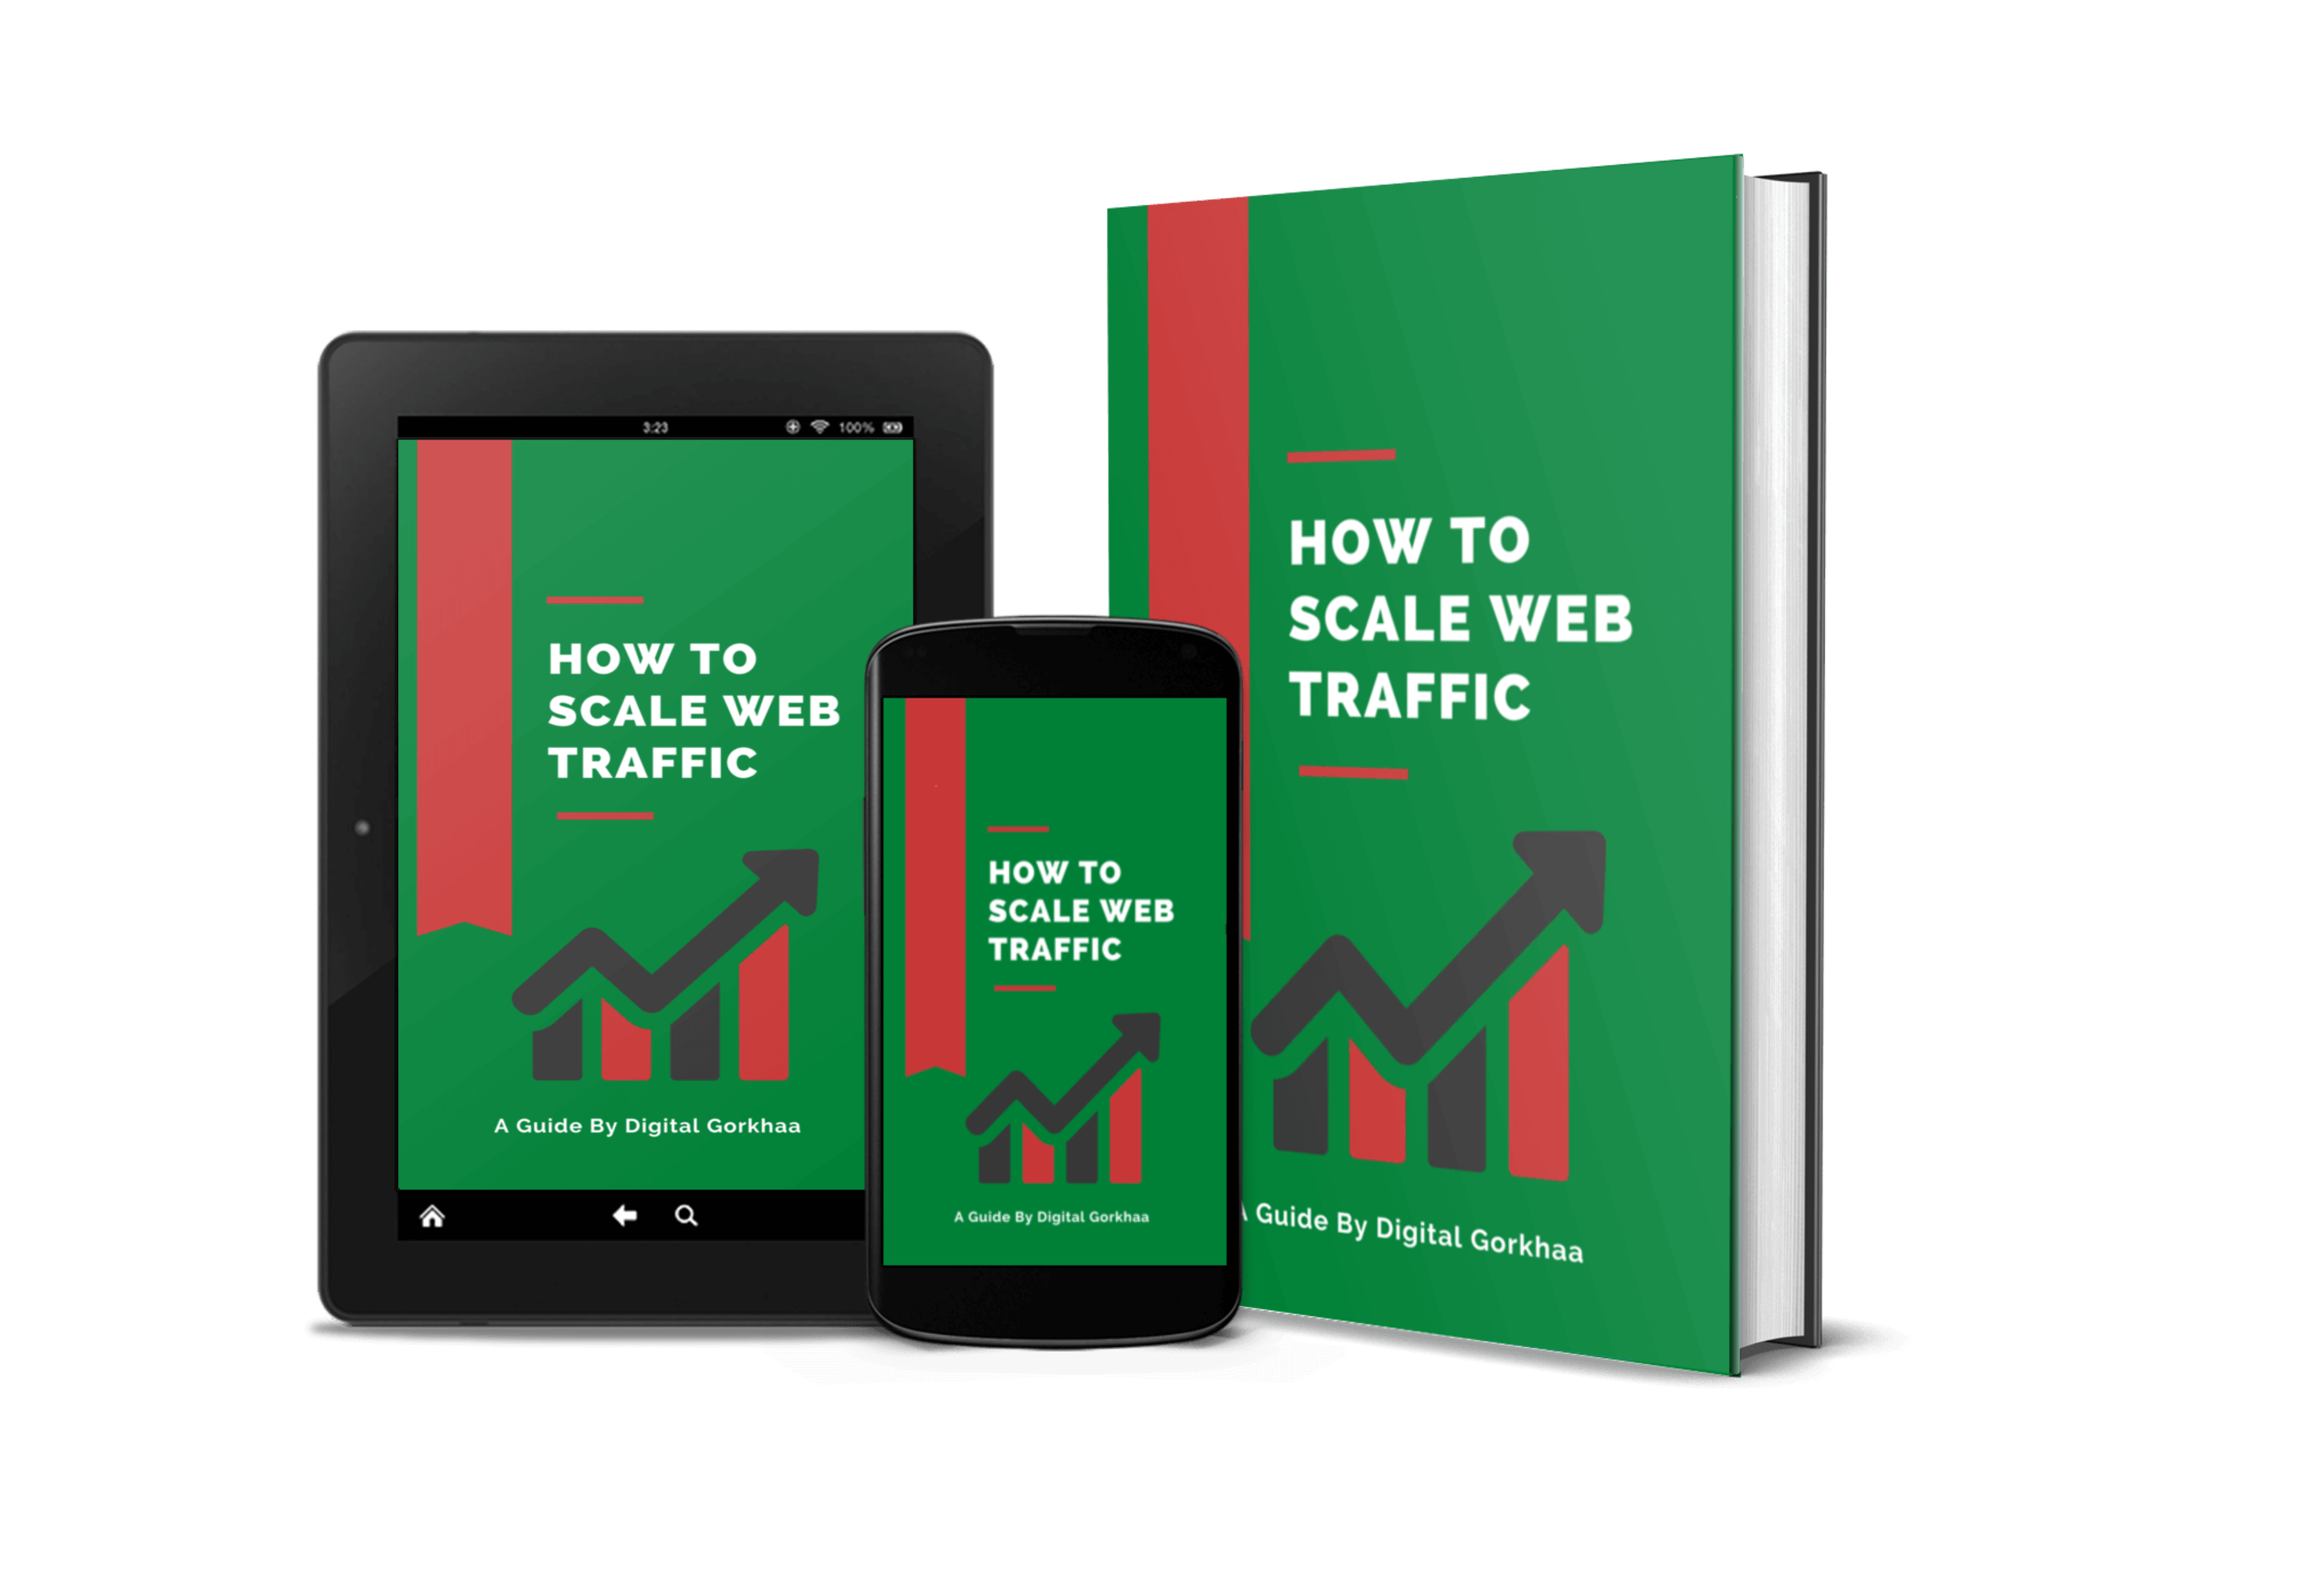 How to scale web traffic